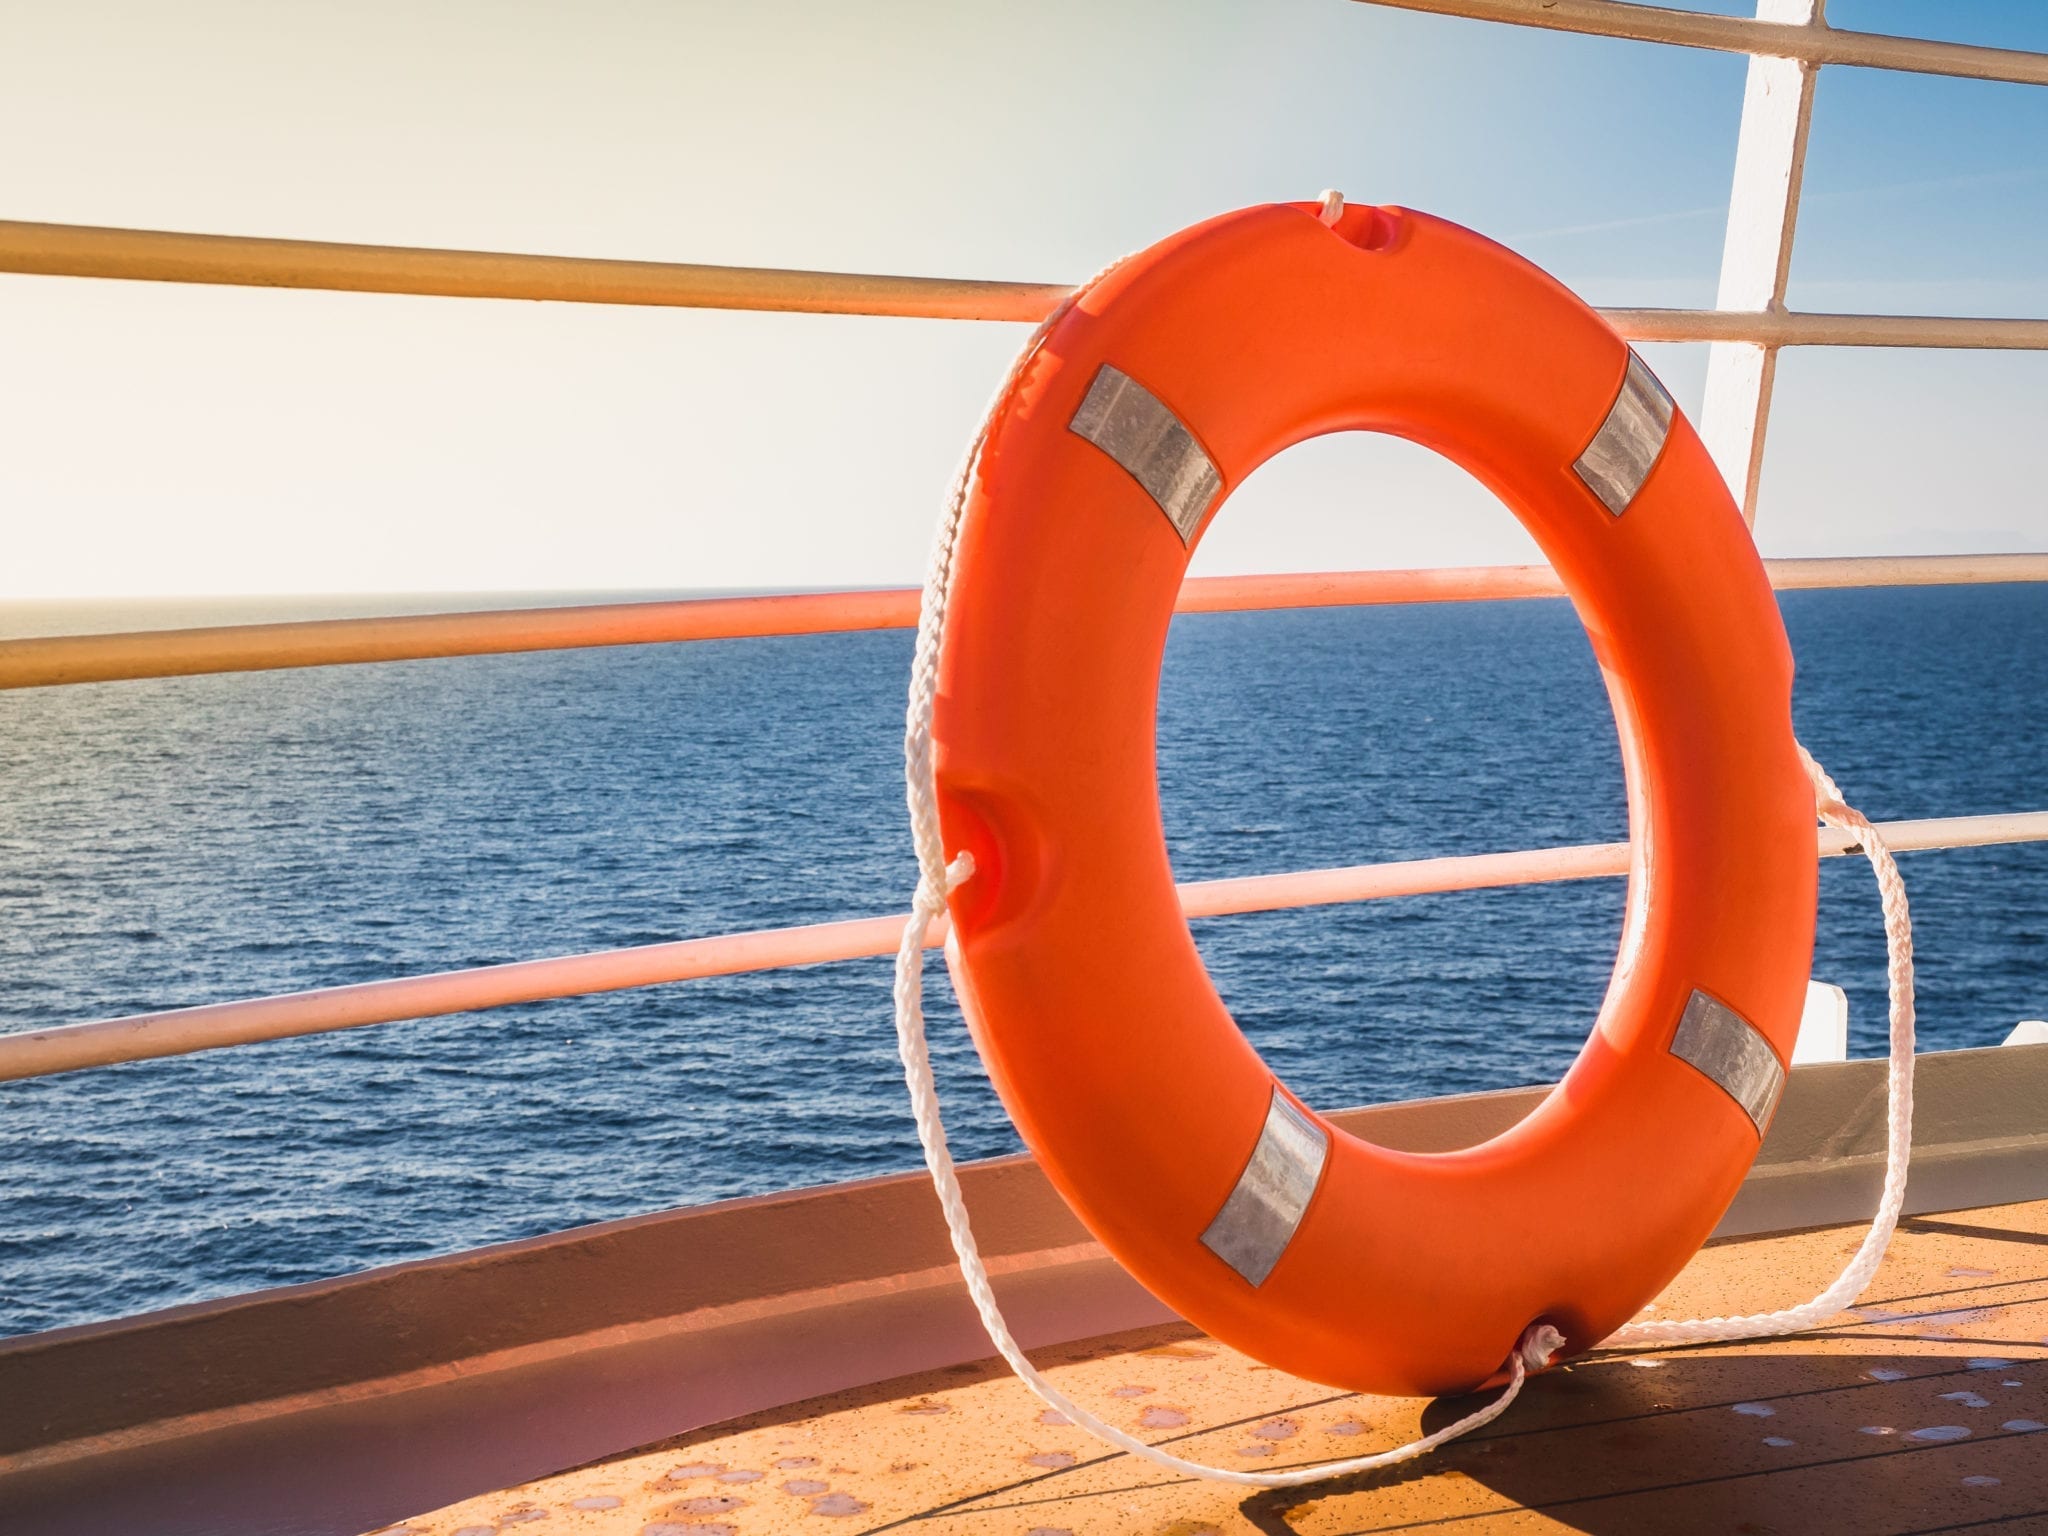 The Many Different Ways Cruises Can Be Dangerous